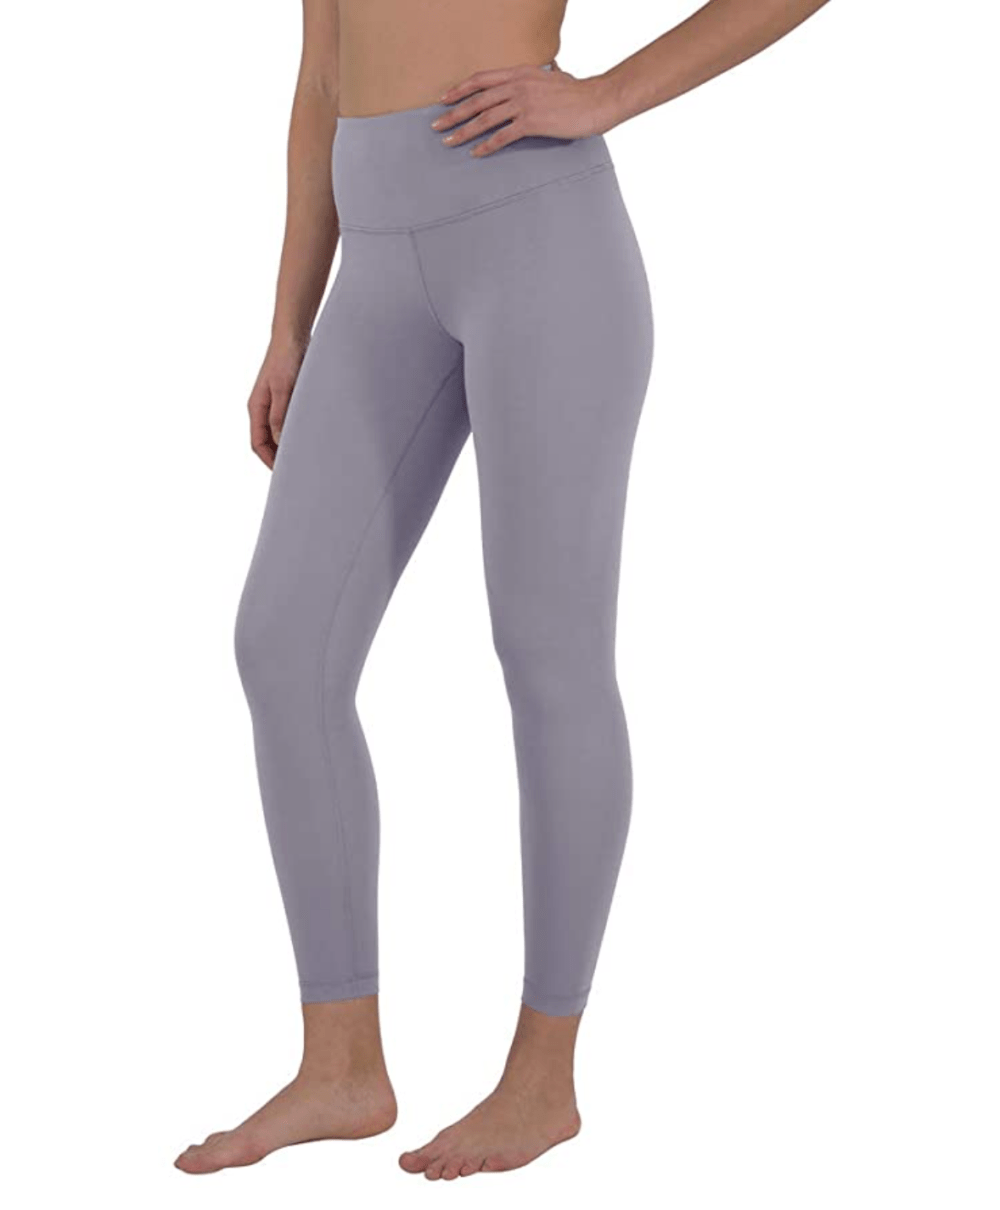 Yogalicious High Rise Squat Proof Criss Cross Yoga Pants for Women Tummy  Control Non See Through Ankle Yoga Leggings - Yogalicious